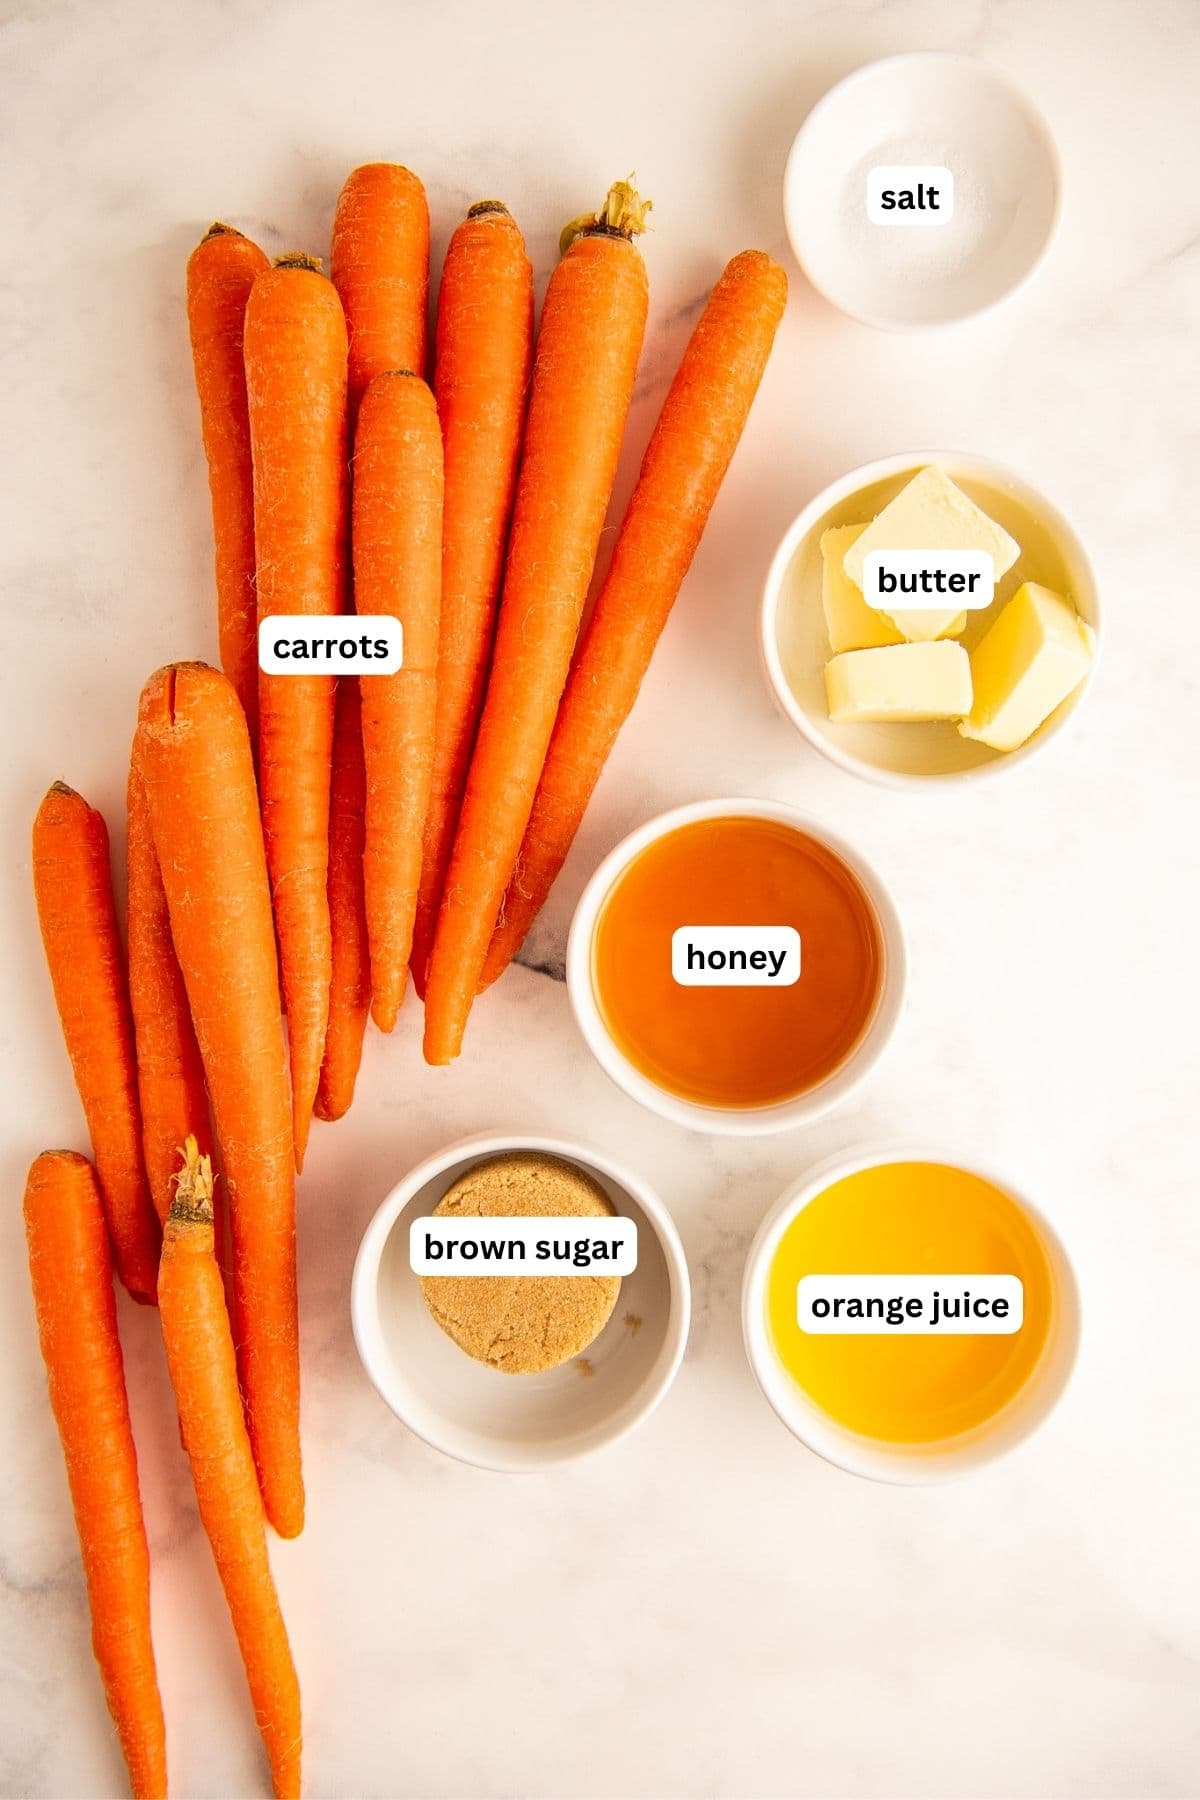 Ingredients arranged in bowls to make honey glazed carrots recipe. From top to bottom: salt, carrots, butter, honey, brown sugar and orange juice.